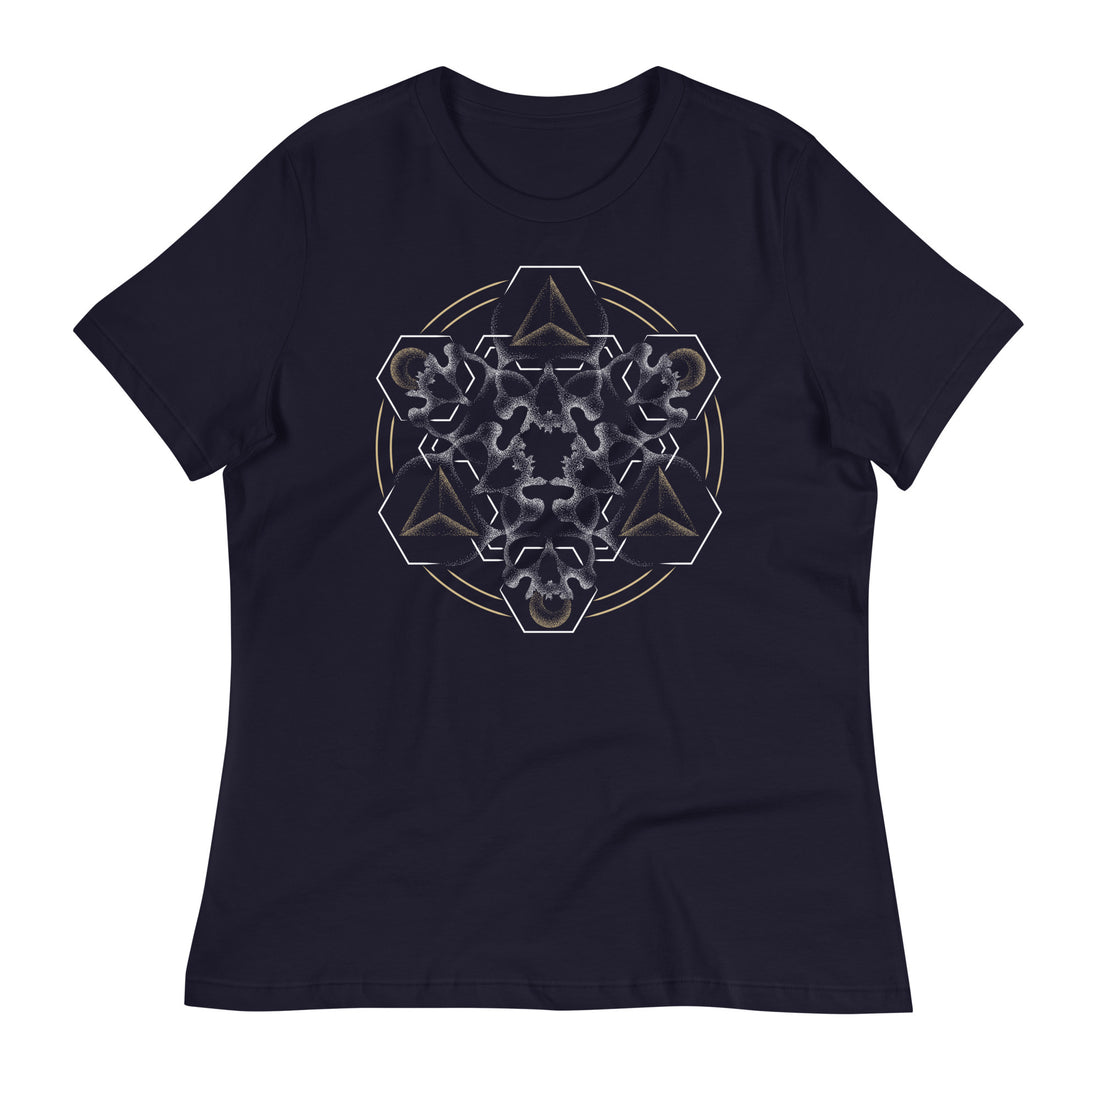 A navy t-shirt with a mandala built from white dot work skulls and gold and white geometric shapes.